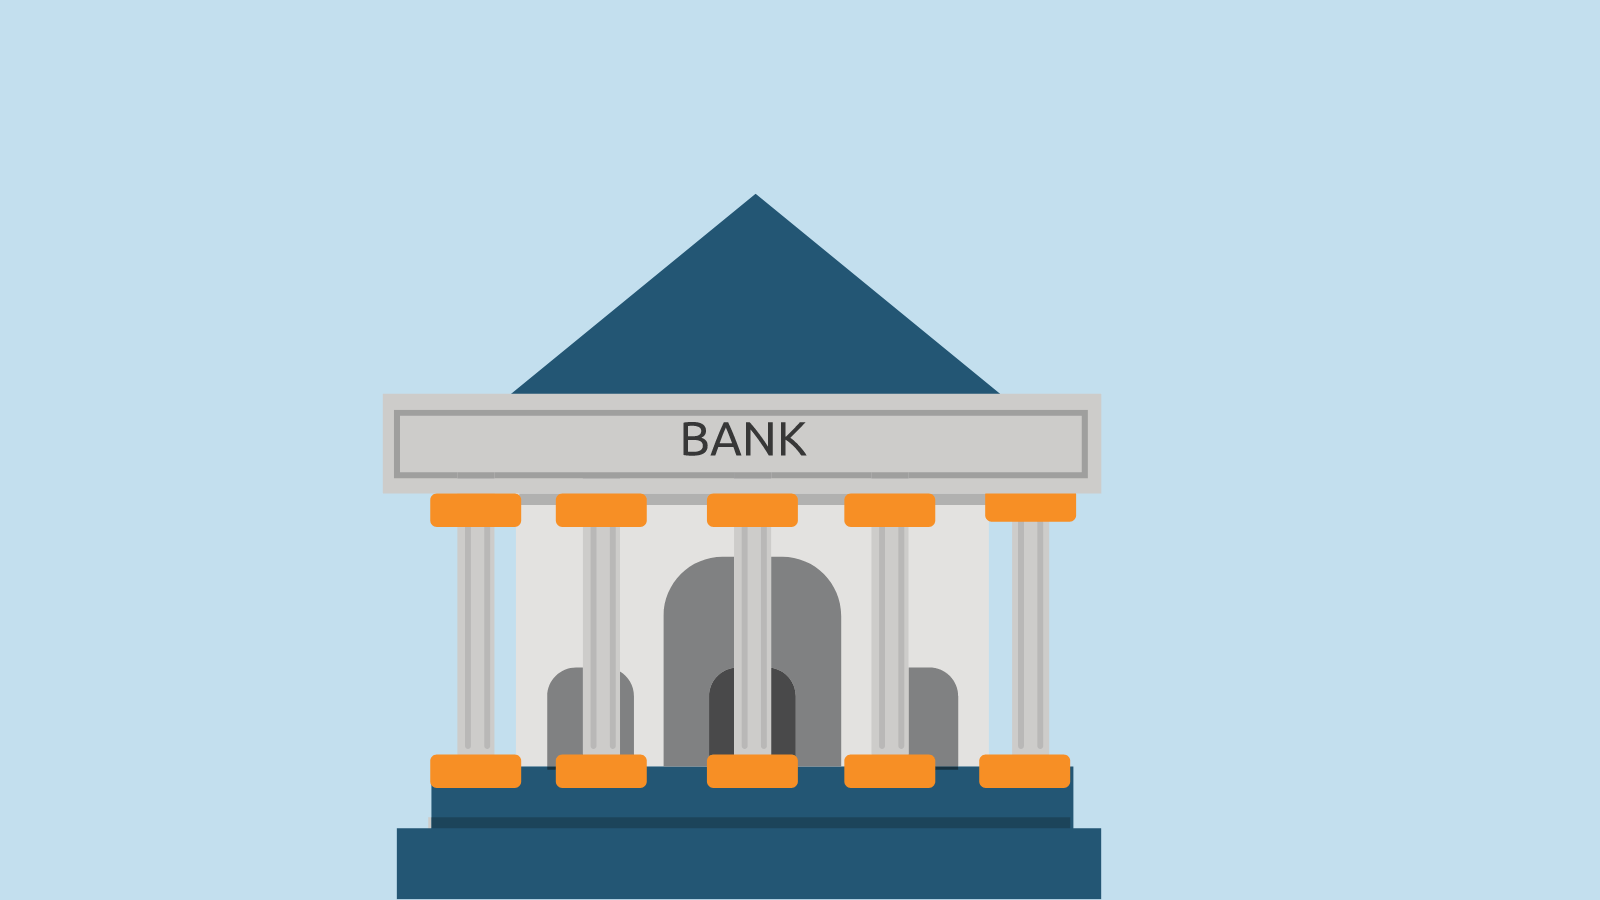 An illustration of a bank